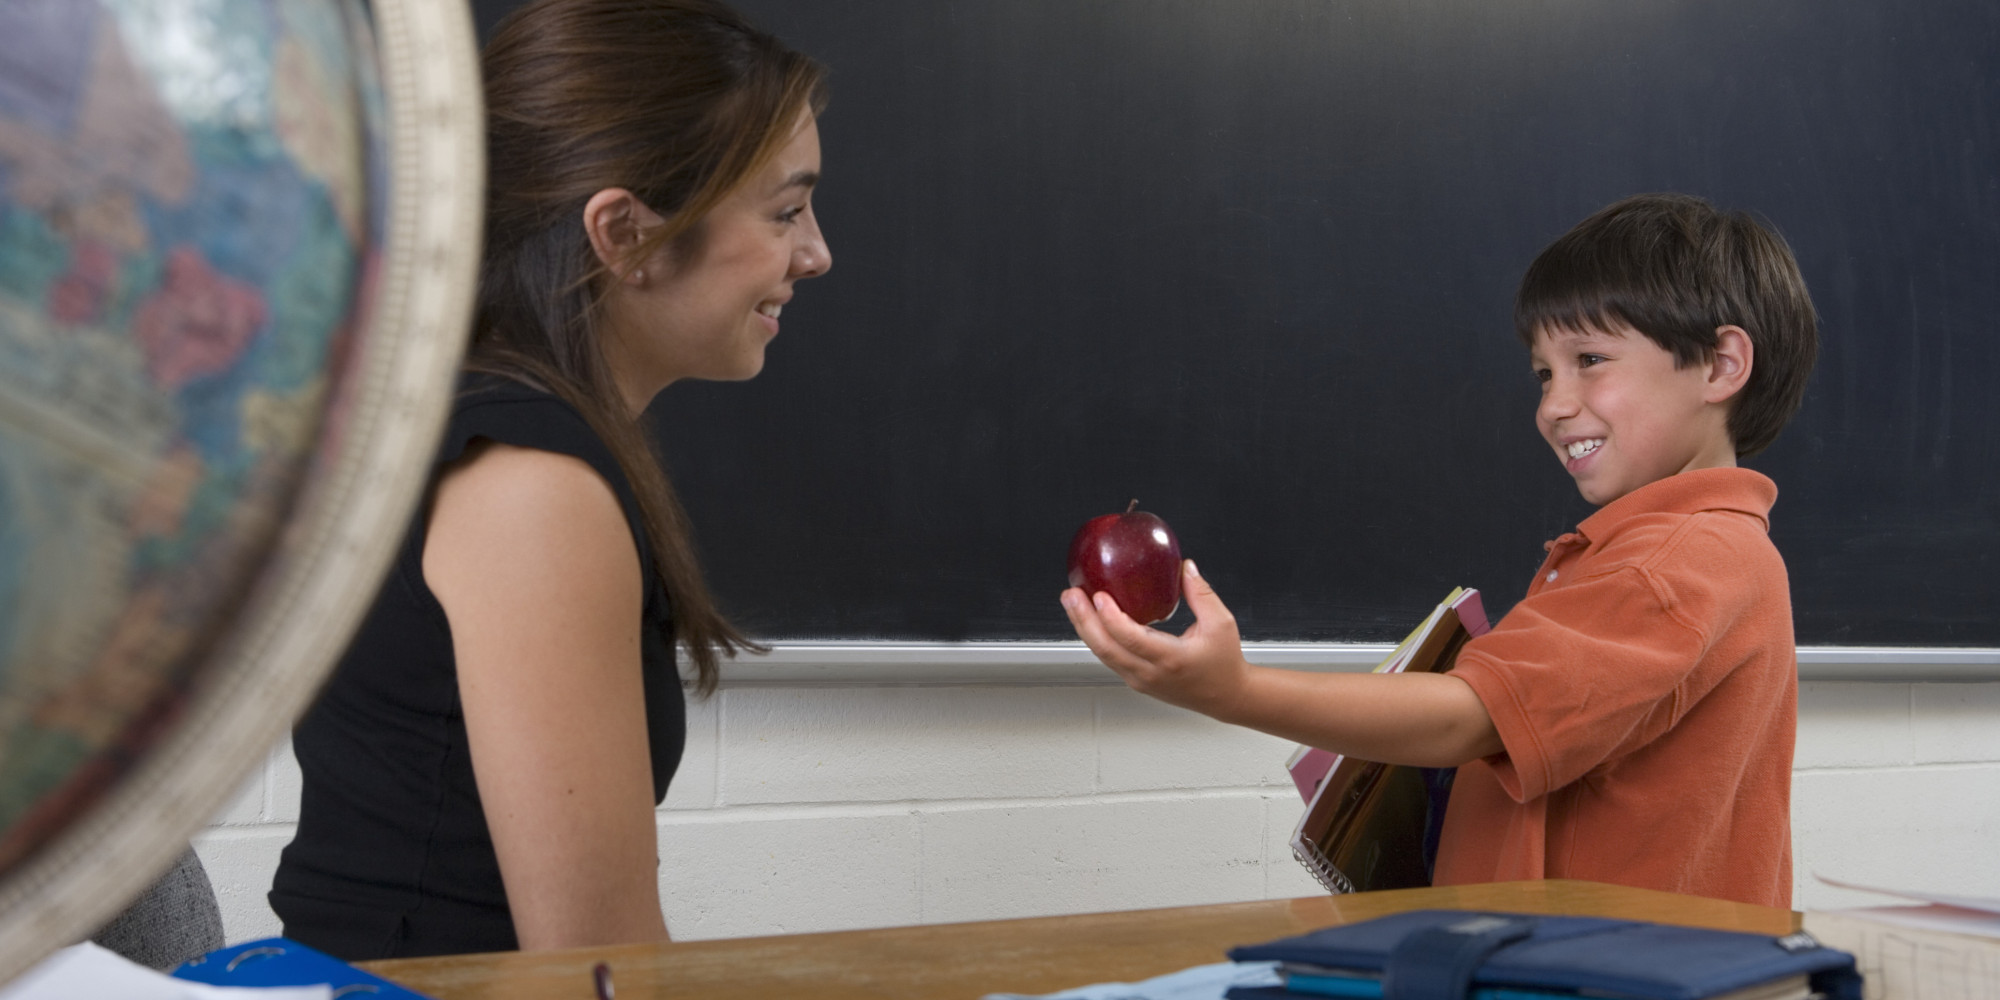 These Are The Best Gifts Teachers Have Ever Received From Students | HuffPost